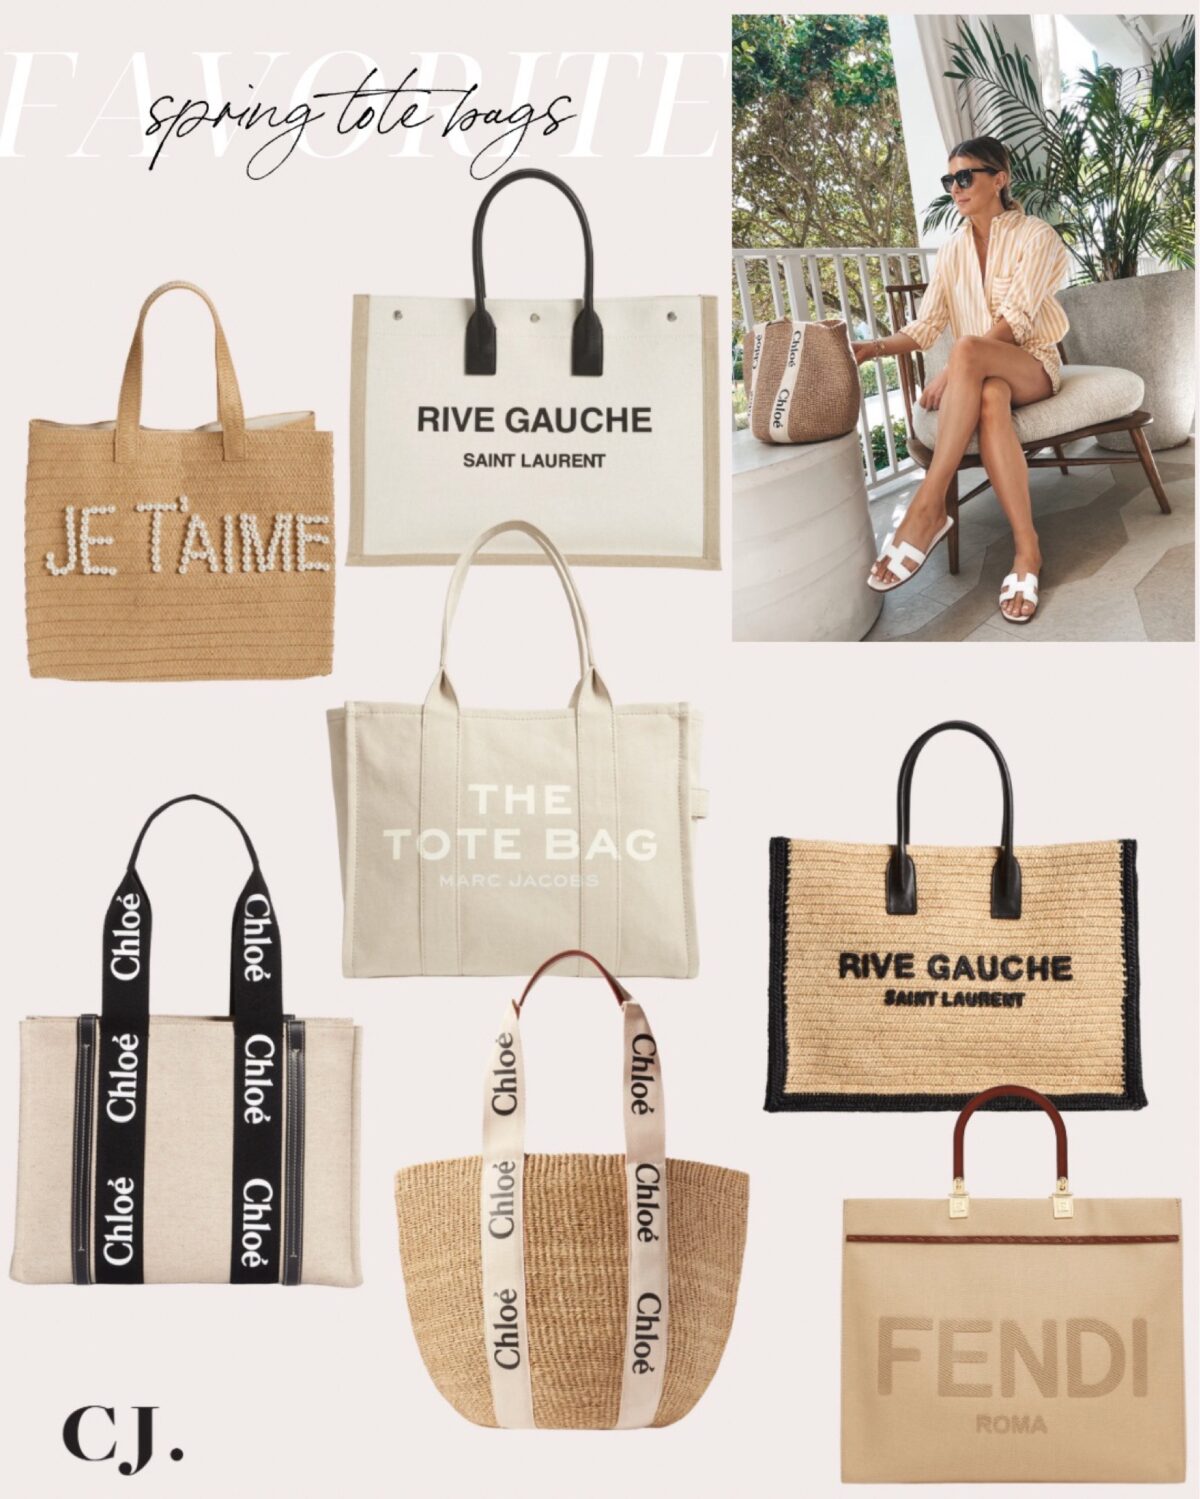 Favorite Tote Bags for Spring